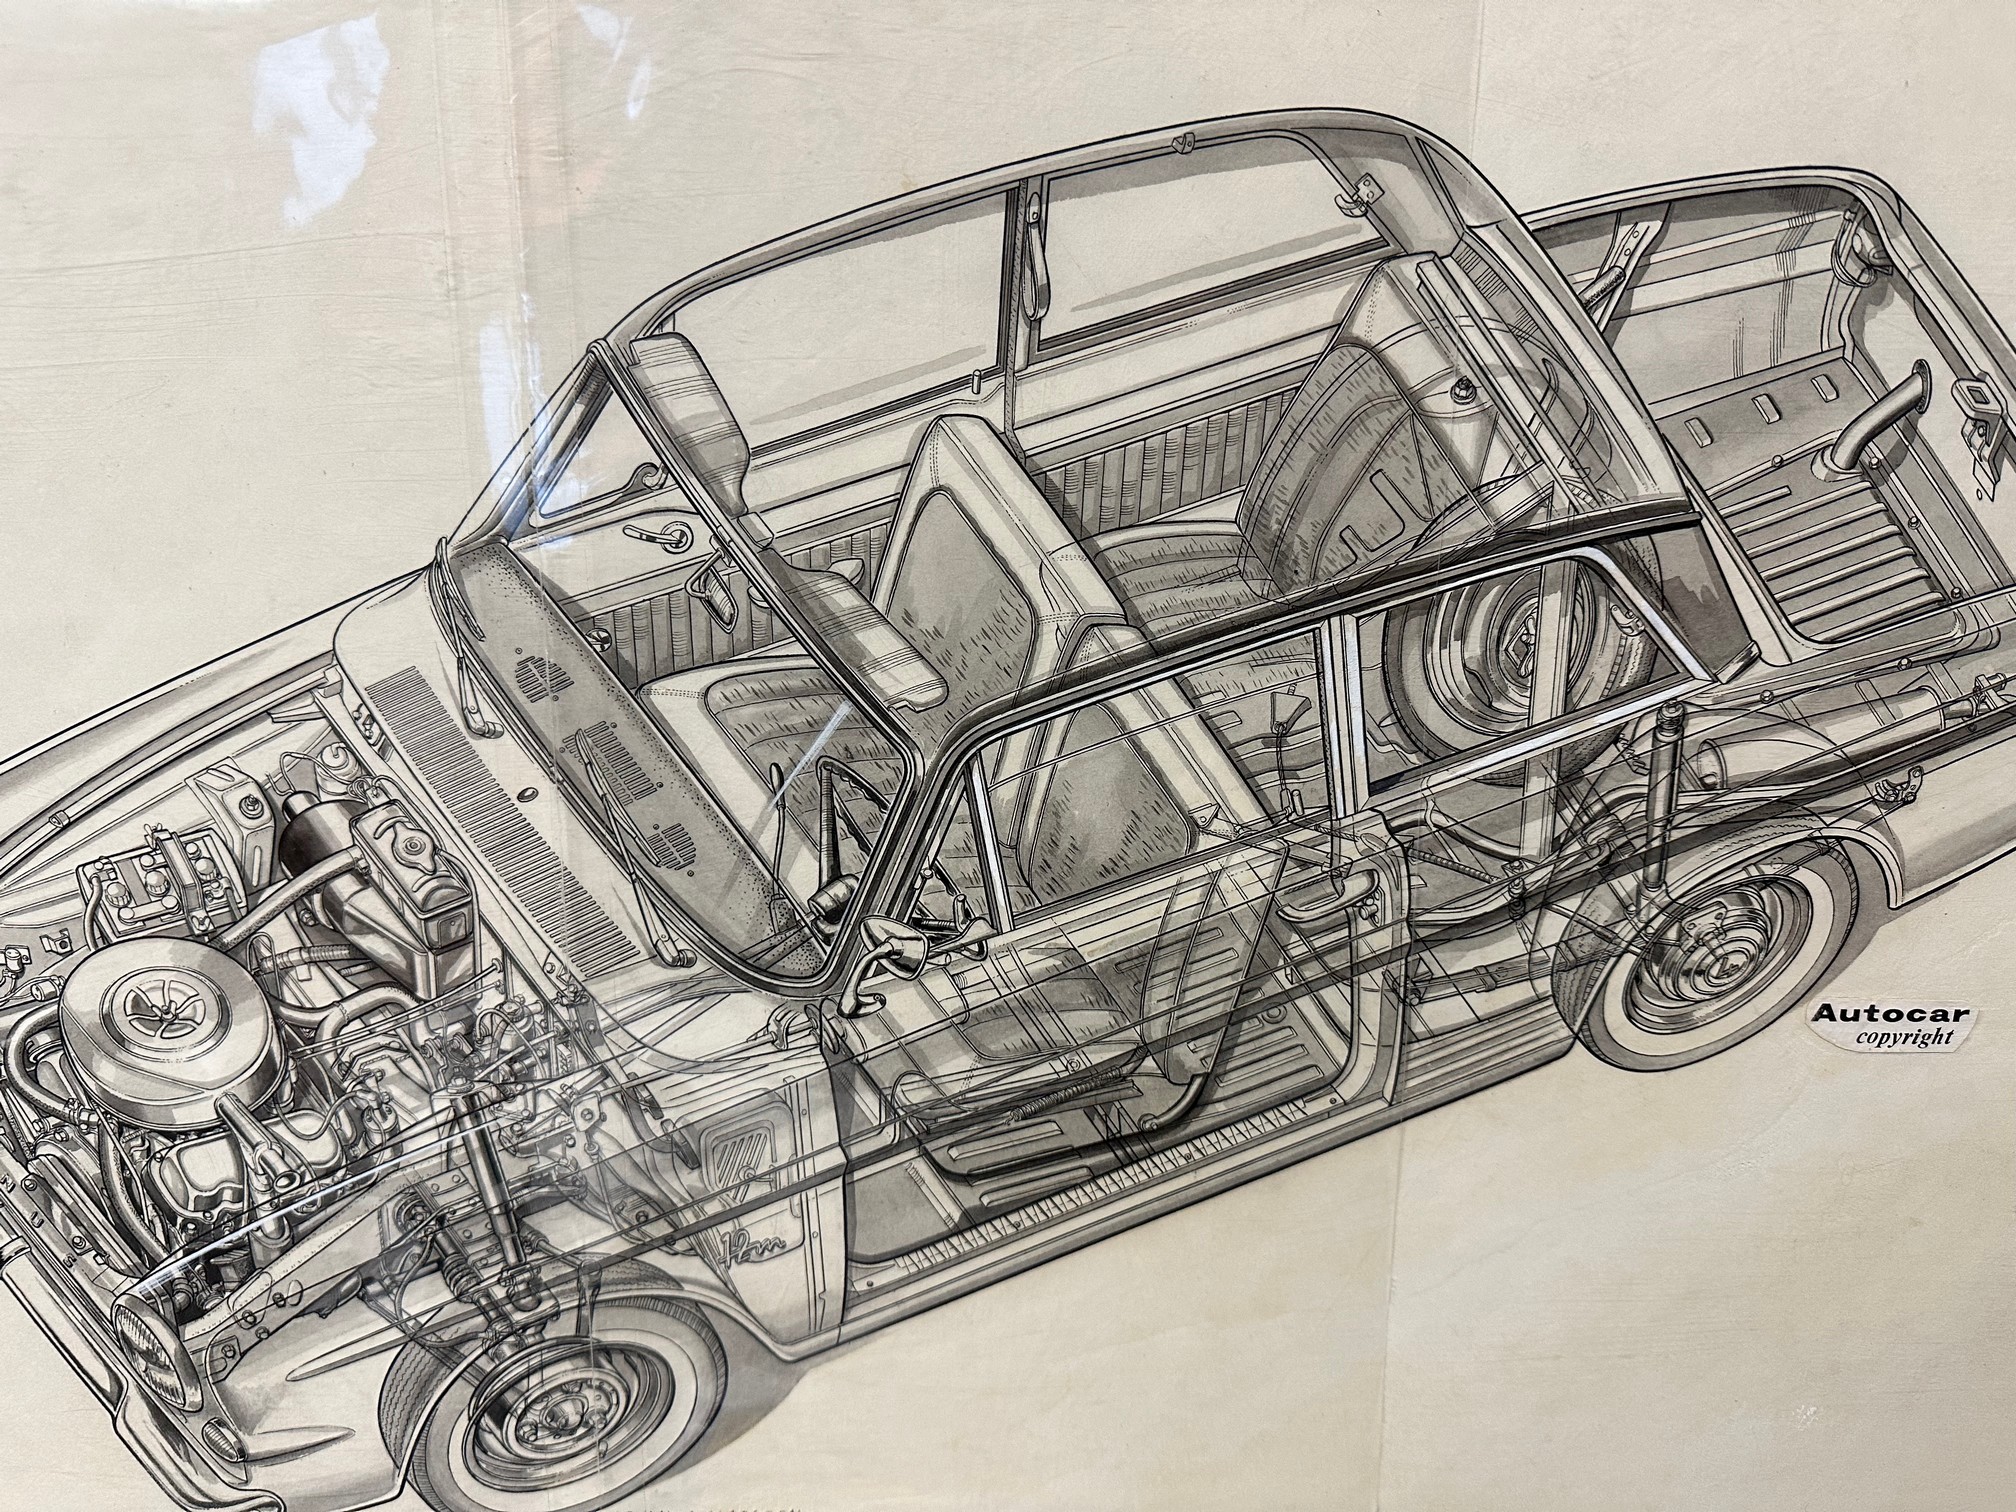 An original cutaway of a 1962 Ford Taunus by John Marsden for Autocar, 26 x 18" - Image 2 of 3